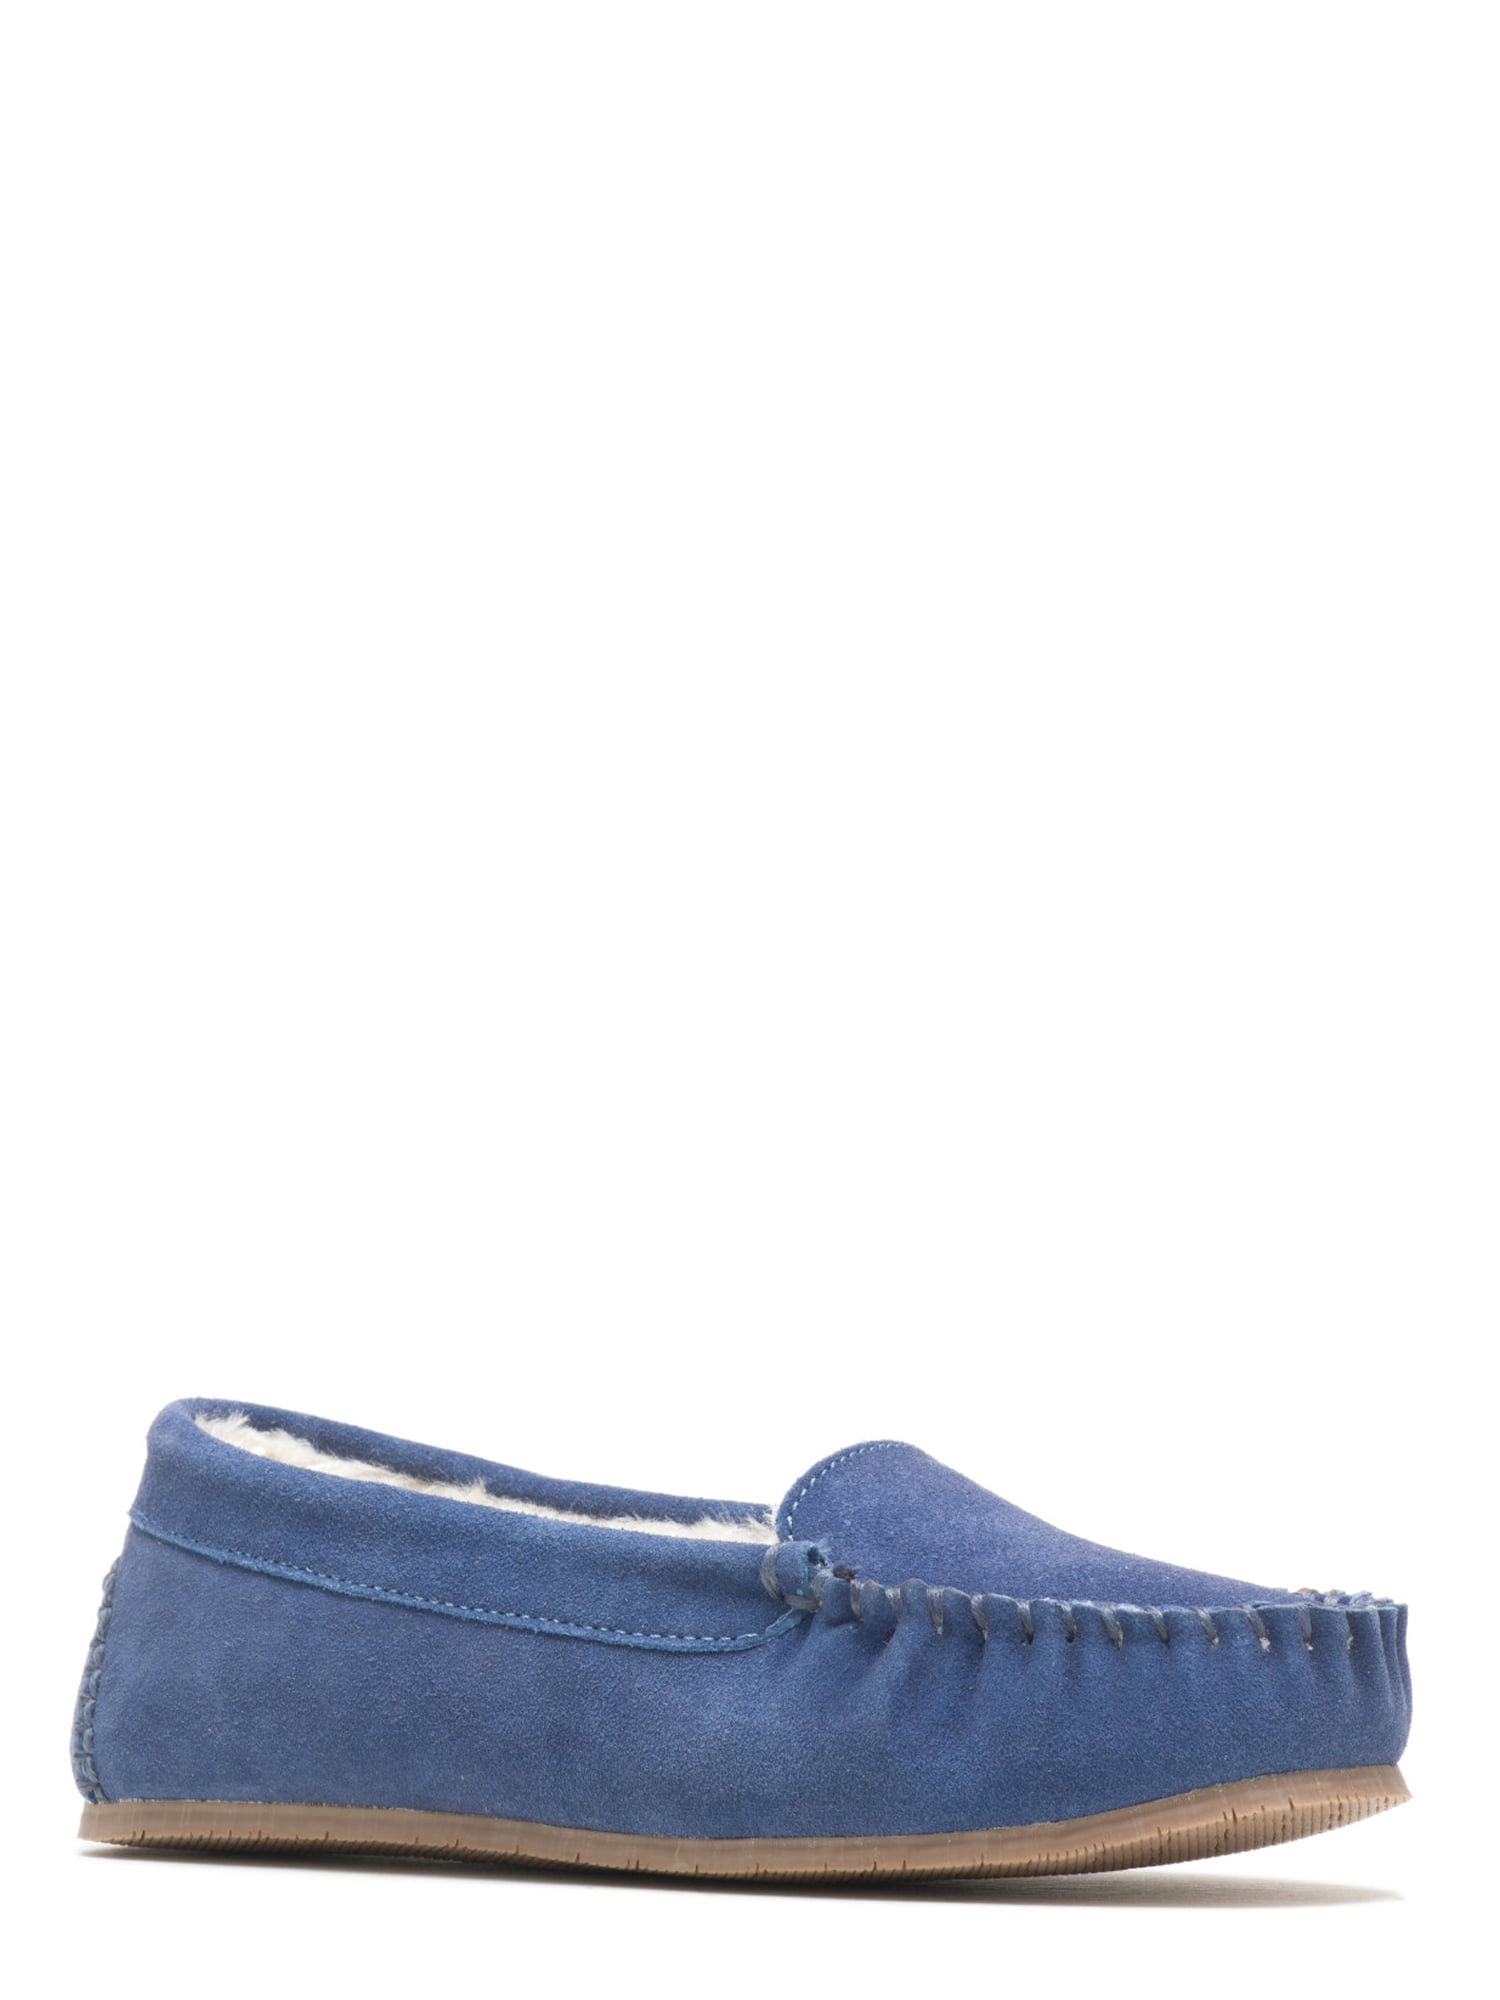 Cheap Womens Blue Hush Puppies Arianna Slippers | Soletrader Outlet